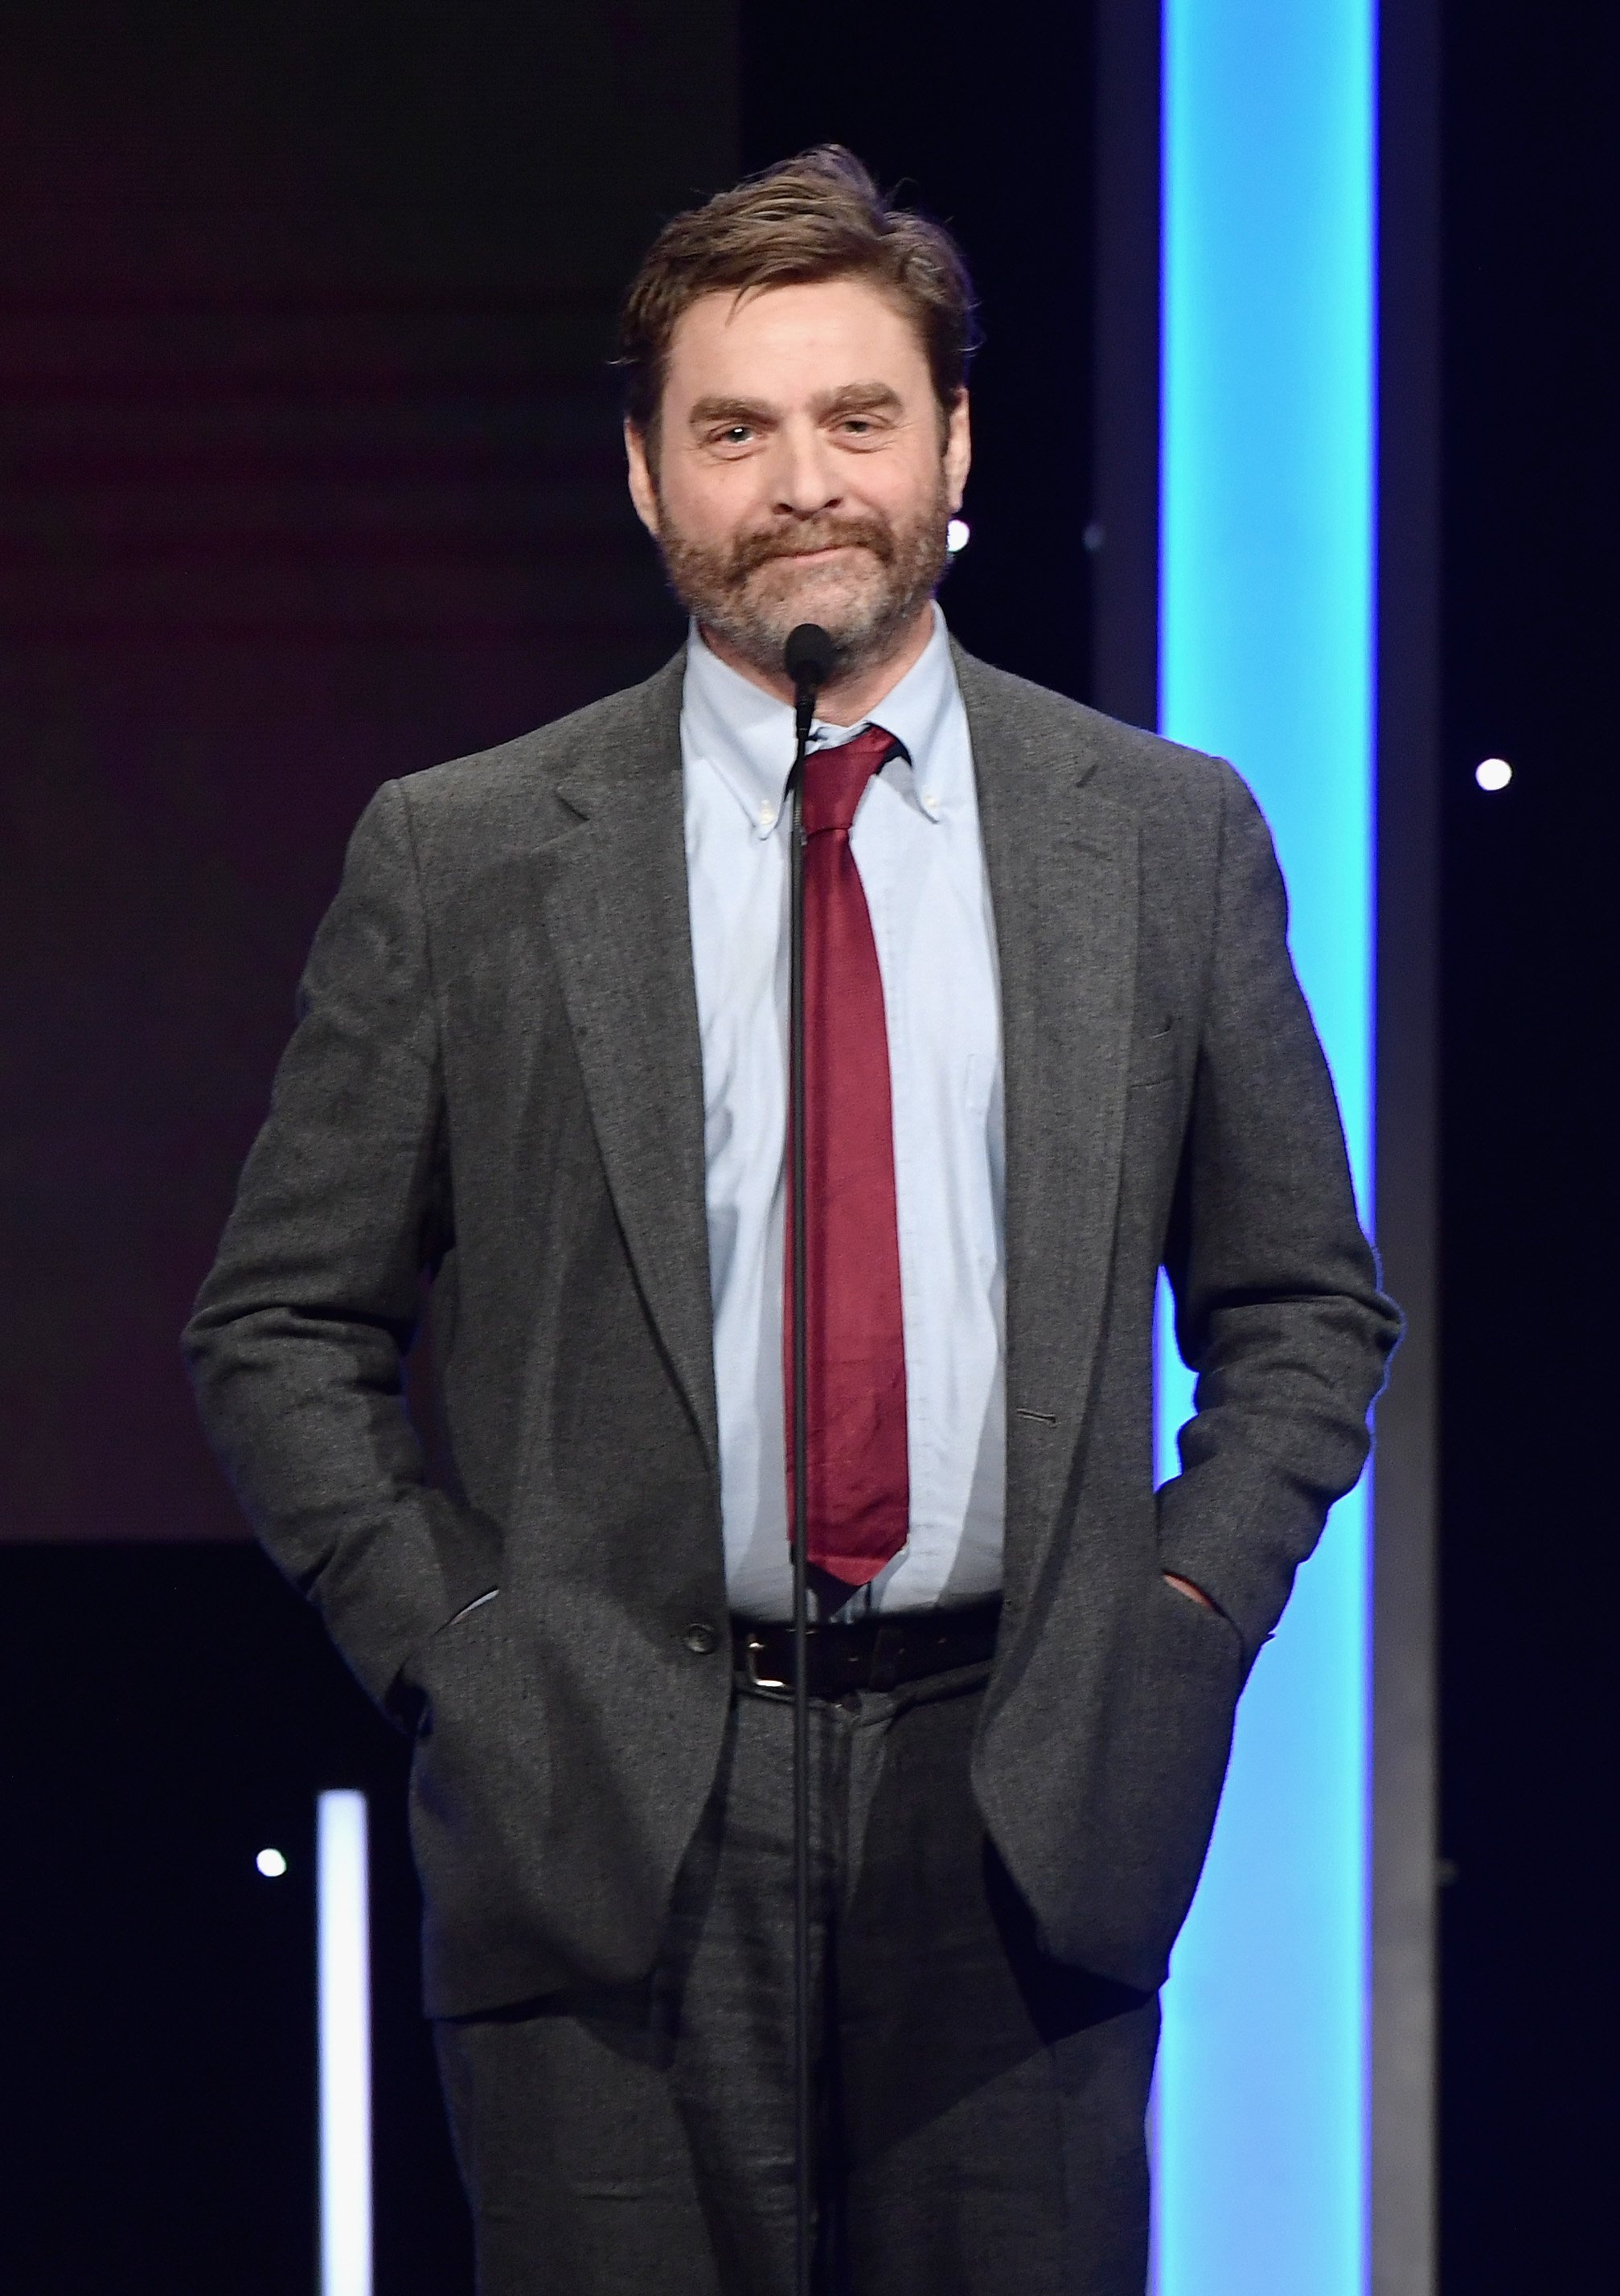 Zach Galifianakis speaks onstage during the 32nd American Cinematheque Award Presentation honoring Bradley Cooper at The Beverly Hilton Hotel on November 29, 2018 in Beverly Hills, California. | Source: Getty Images 